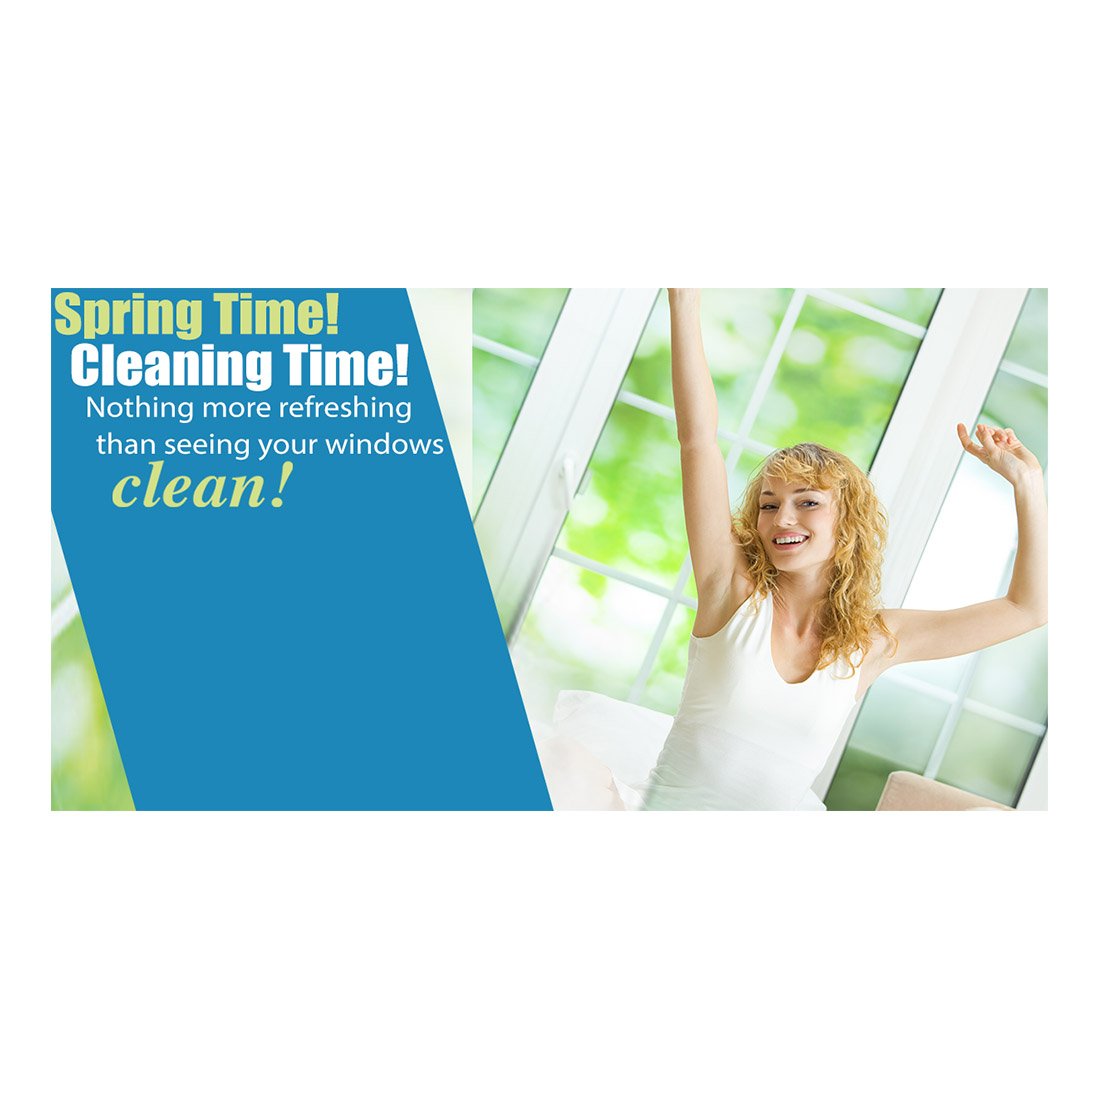 Spring Time Cleaning Time Facebook Ad